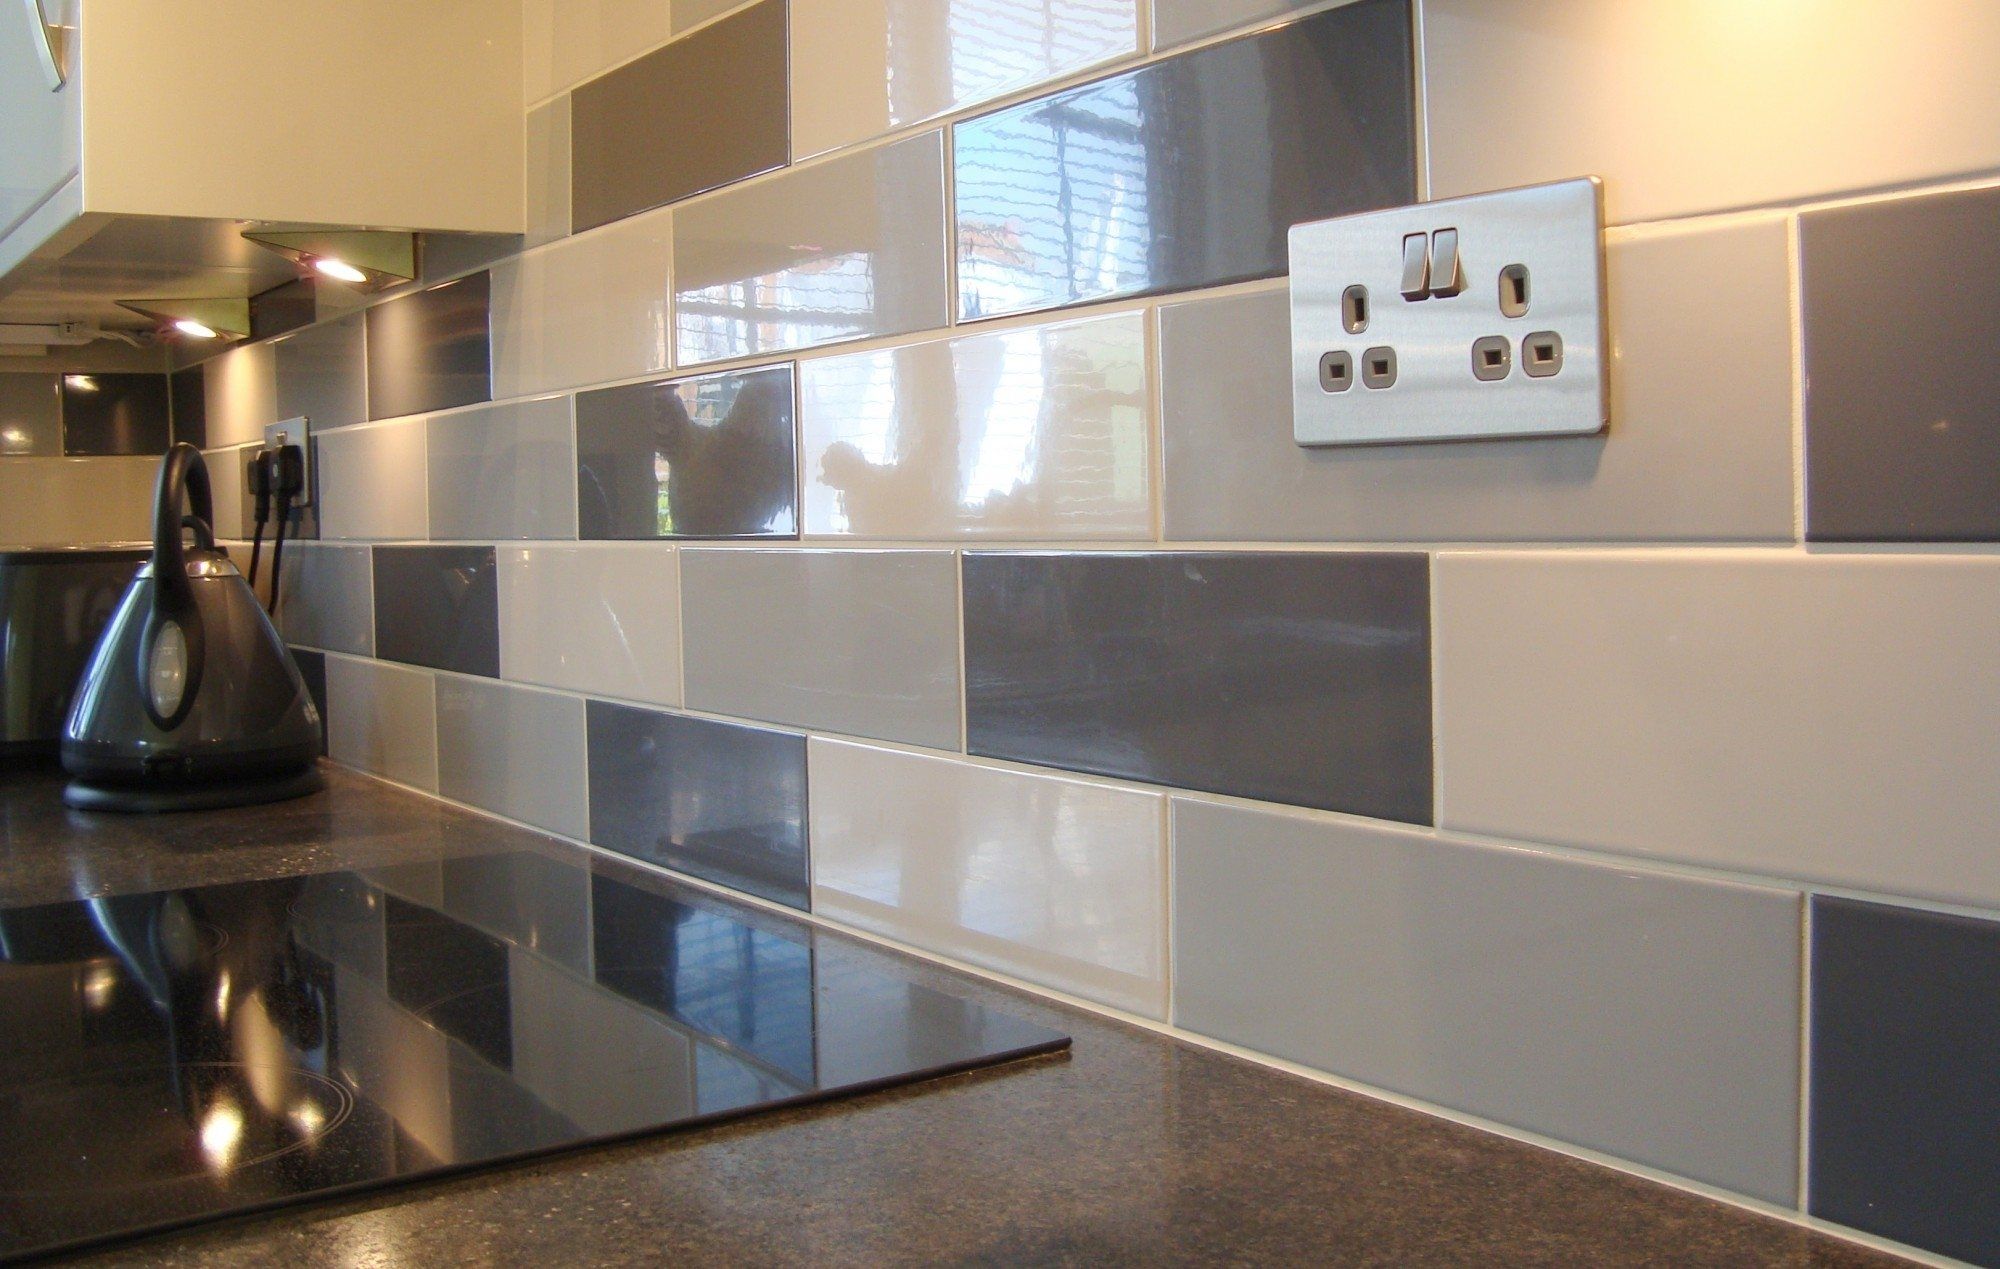 Kitchen Wall Tile Ideas: Bring Color, Pattern And Style To Vertical Surfaces